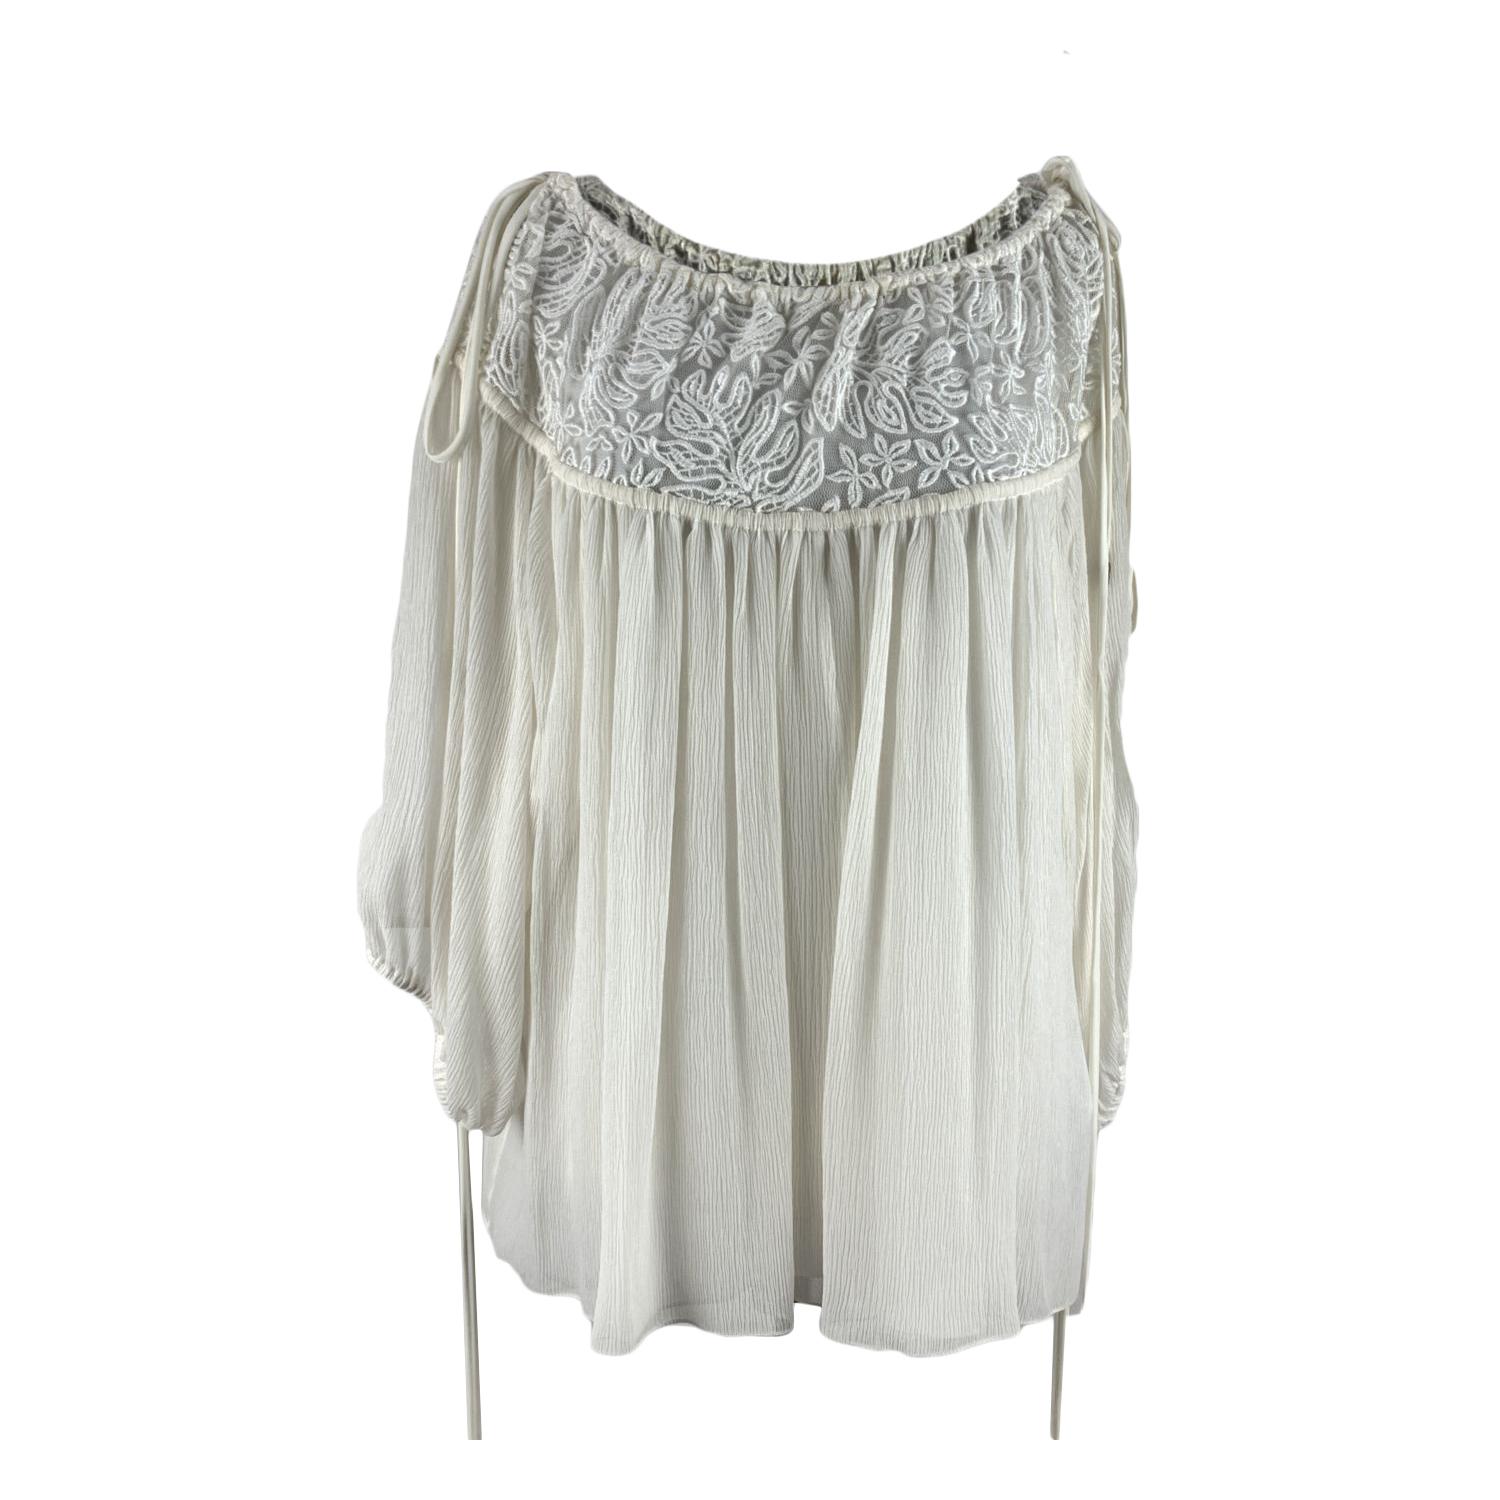 Chloe white oversize blouse in pure silk. Bohemian and romantic style. Round neck with ace trim and drawstring detailing on the neckline. Decorative ties with antiqued gold-tone metal shell-shaped ends. Composition: 100% Silk. Size: 36 FR (it should